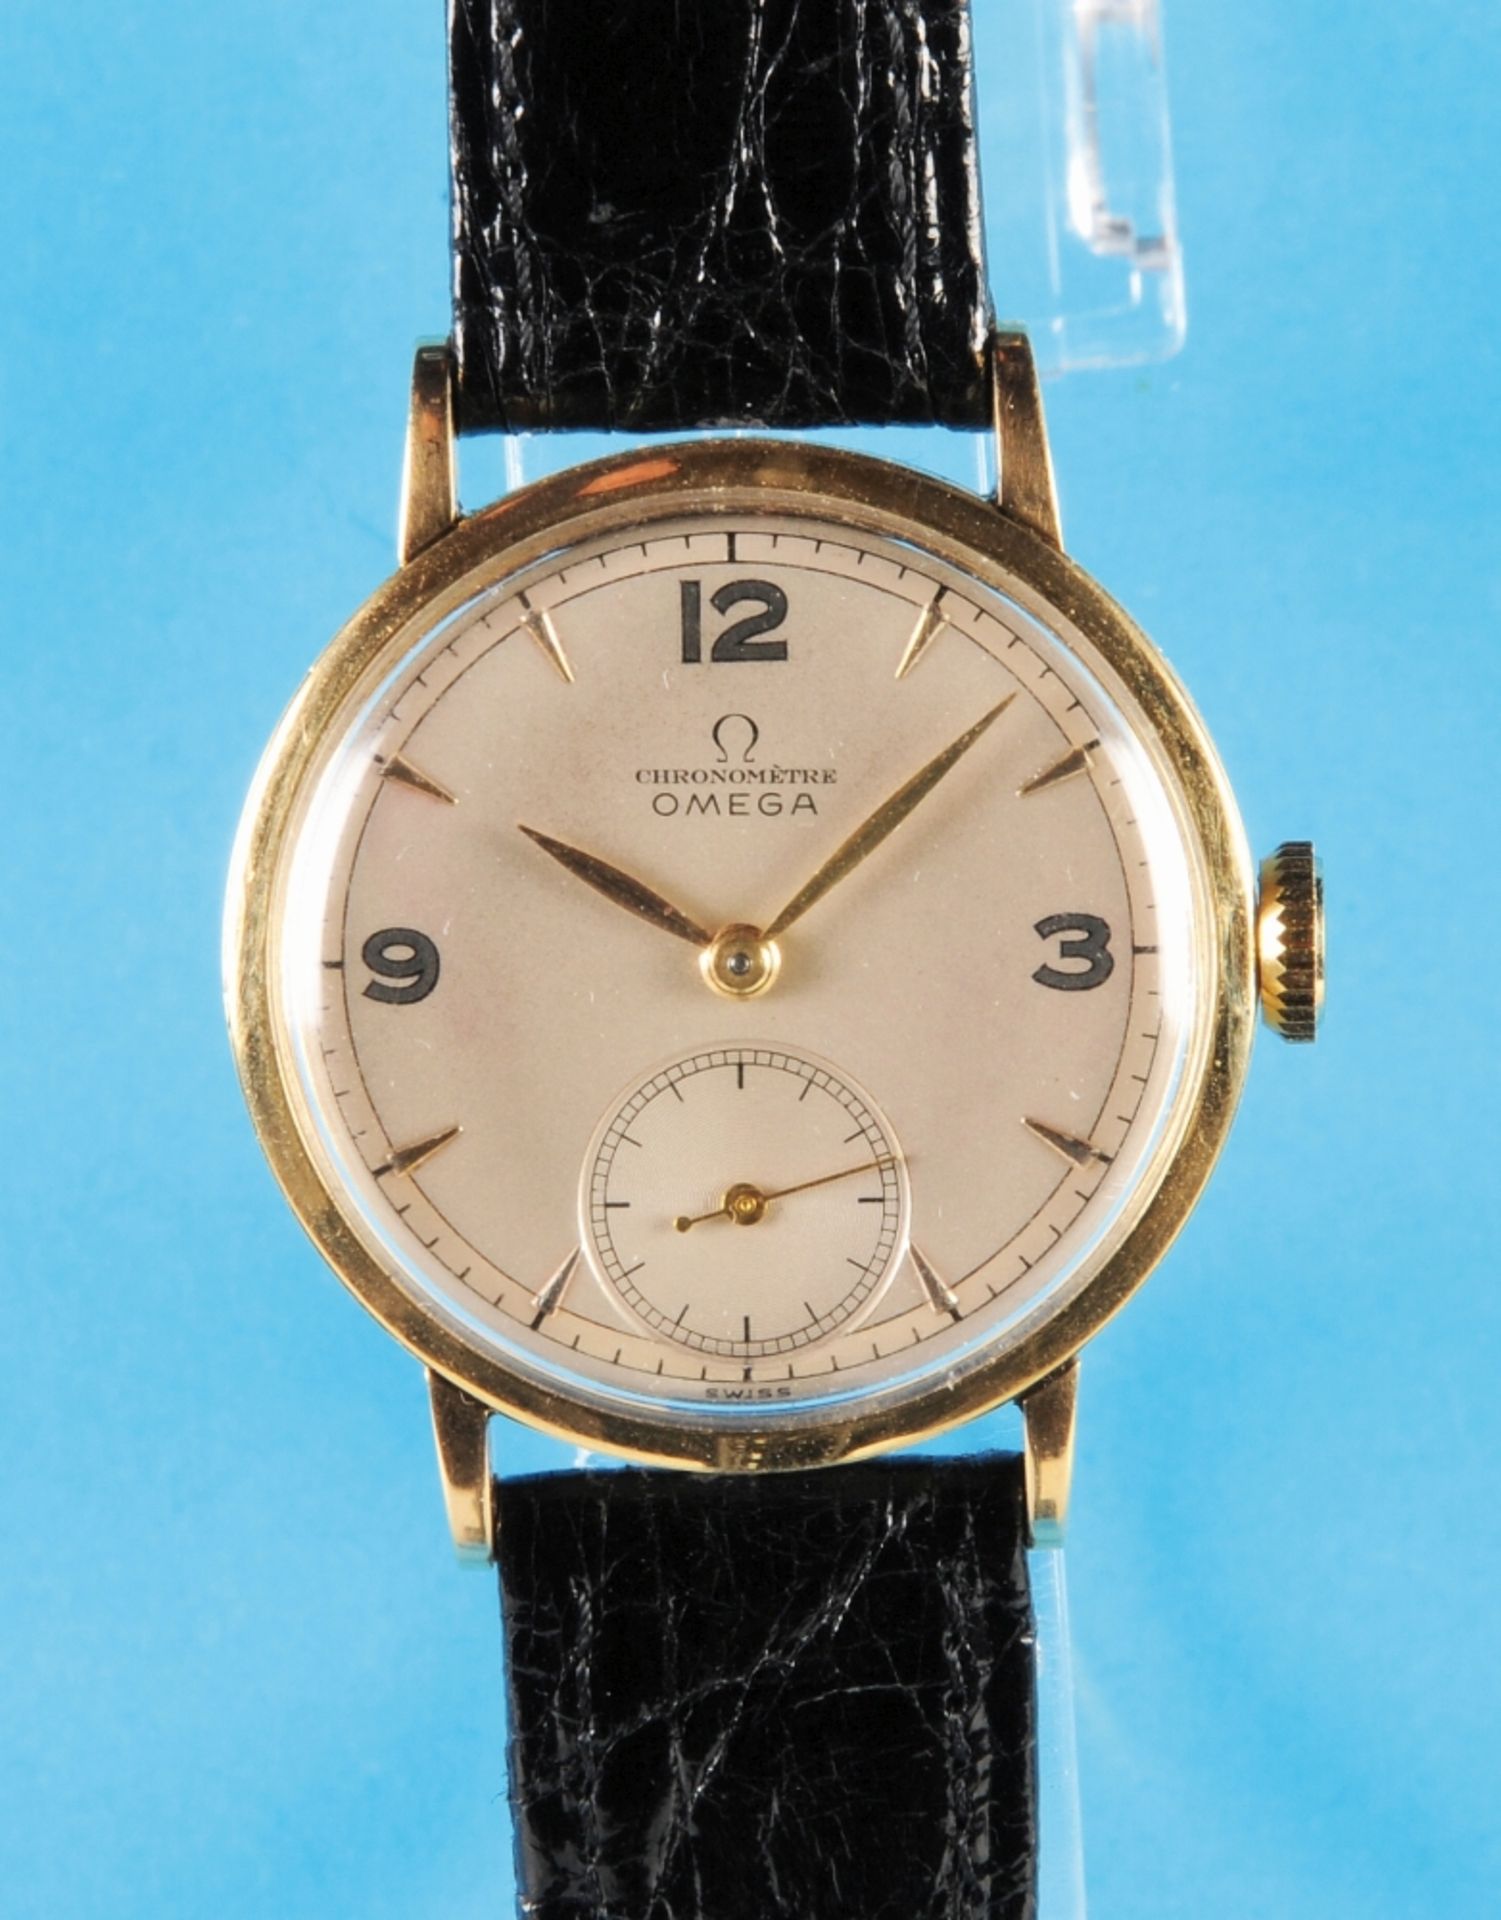 Omega Chronometer Gold Wristwatch with Small Seconds, cal. 30T2 Rg., ca. 1945, 18 ct. yellow gold ca